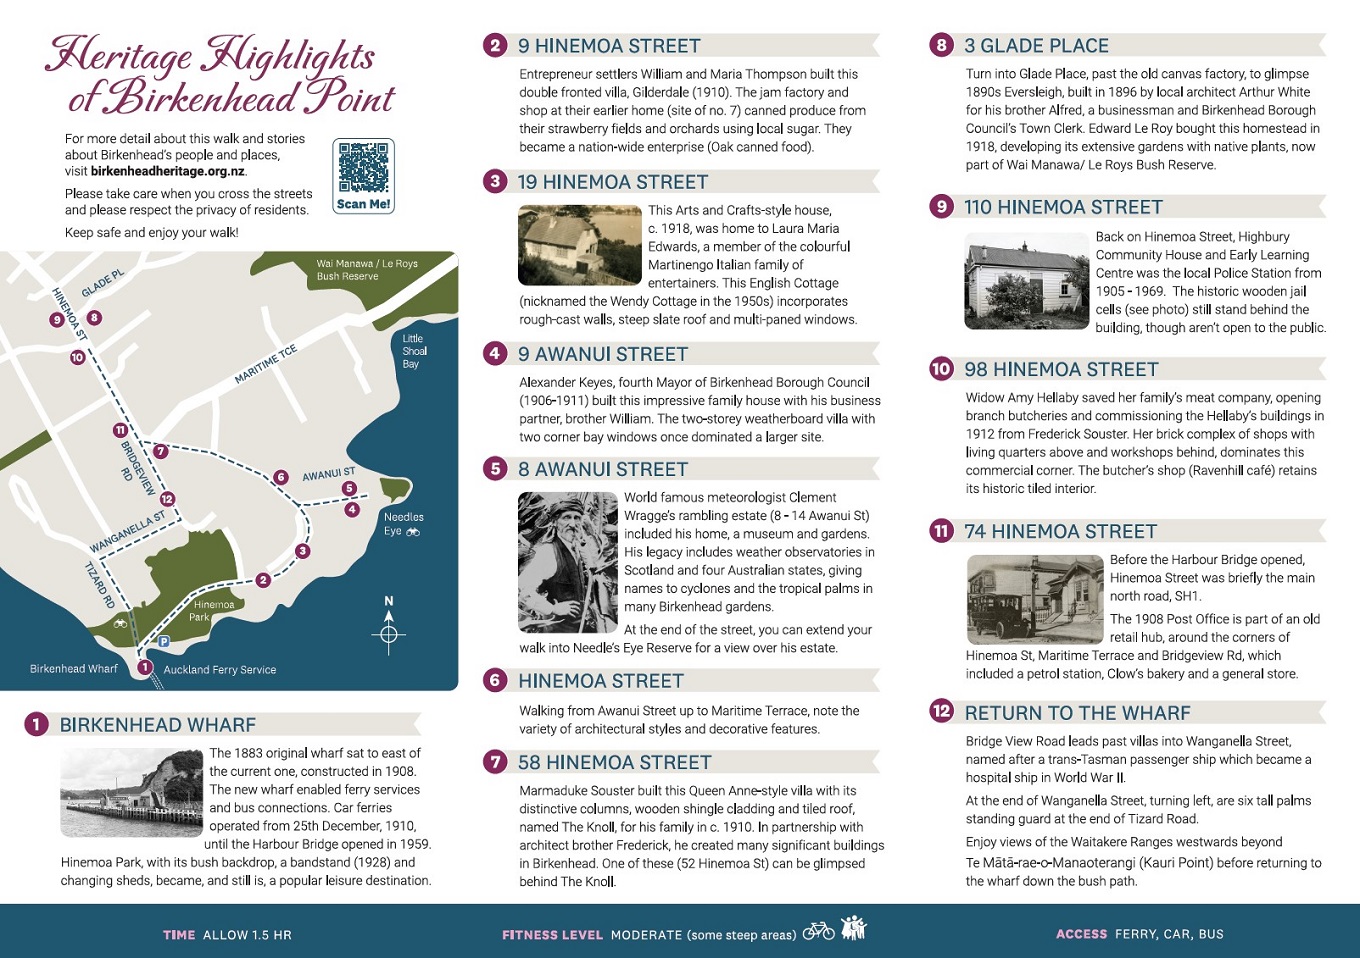 Page two of the heritage map and brochure of Birkenhead Point.